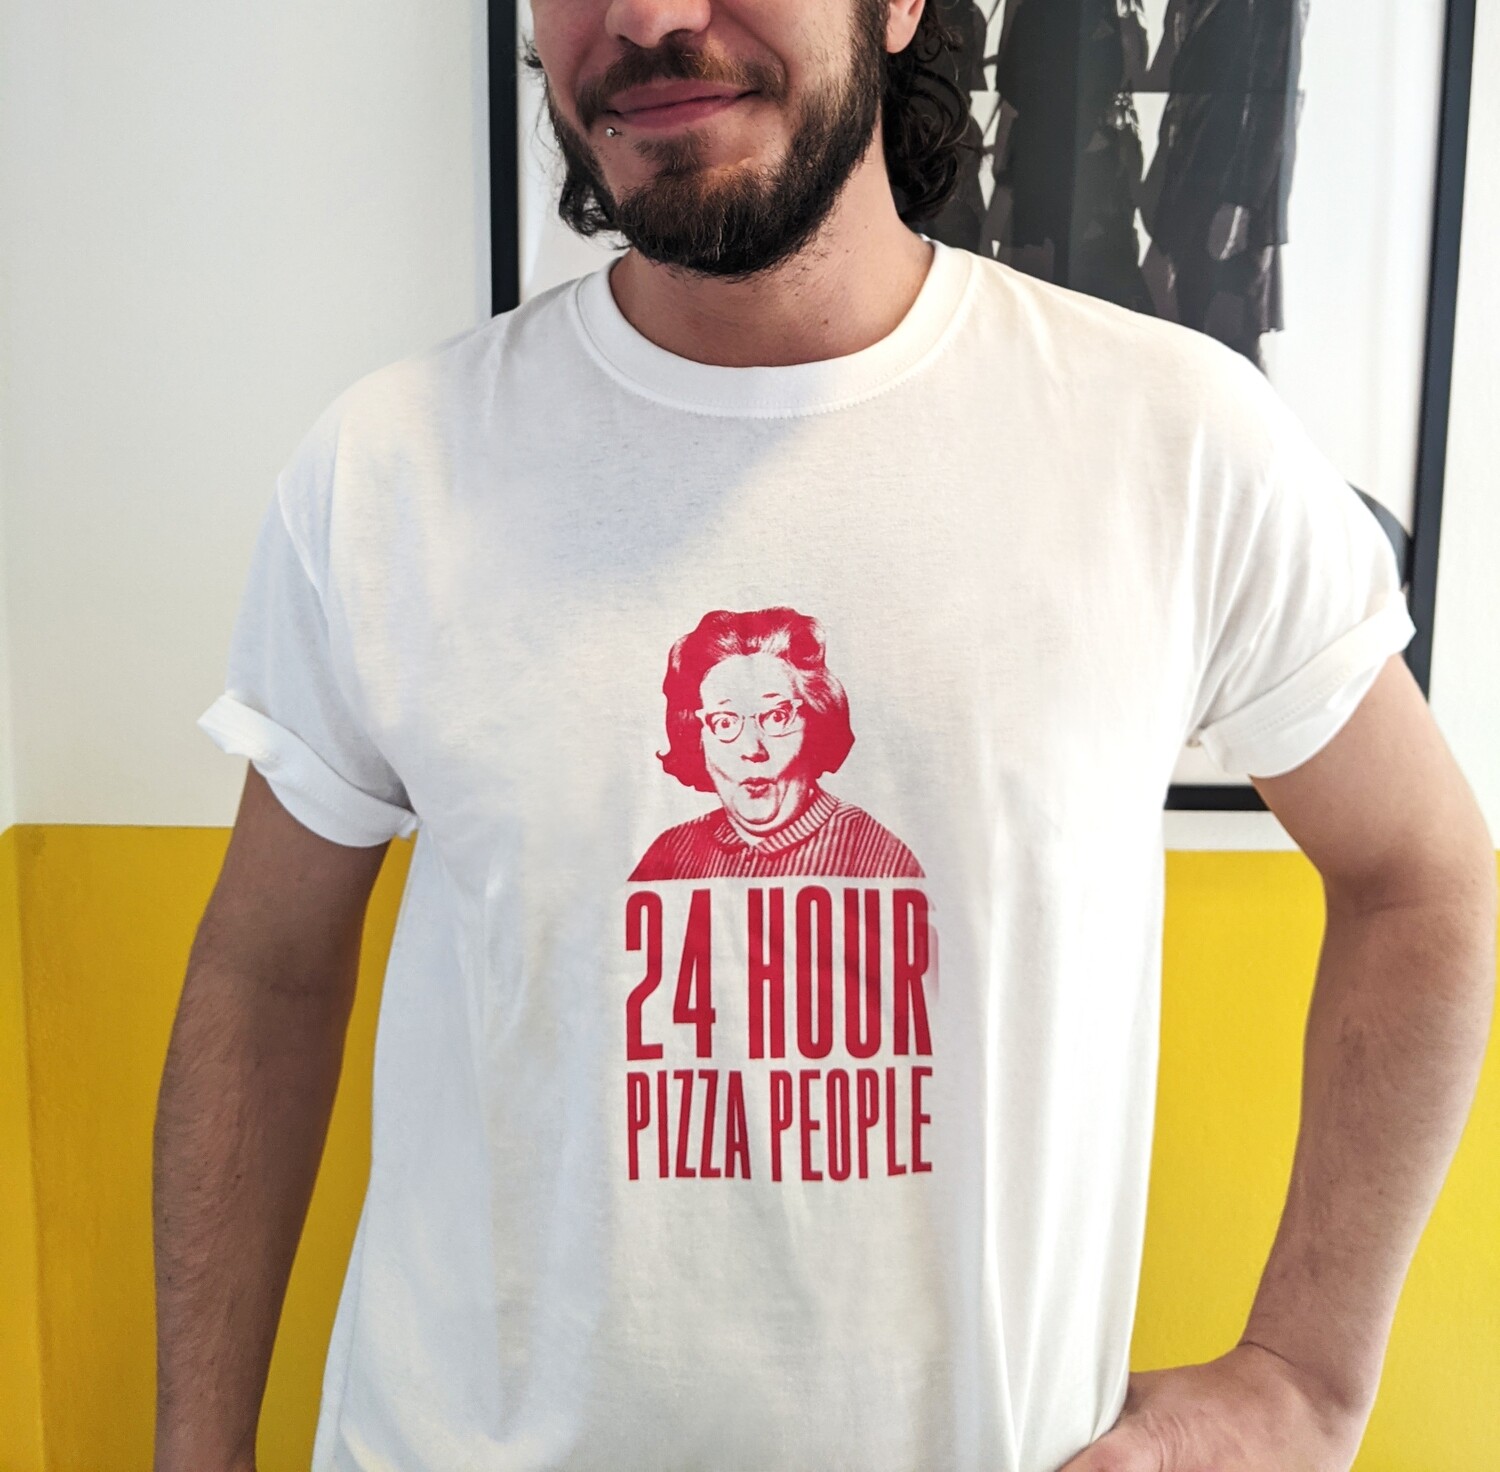 24 HOUR PIZZA PEOPLE / T-SHIRT / White